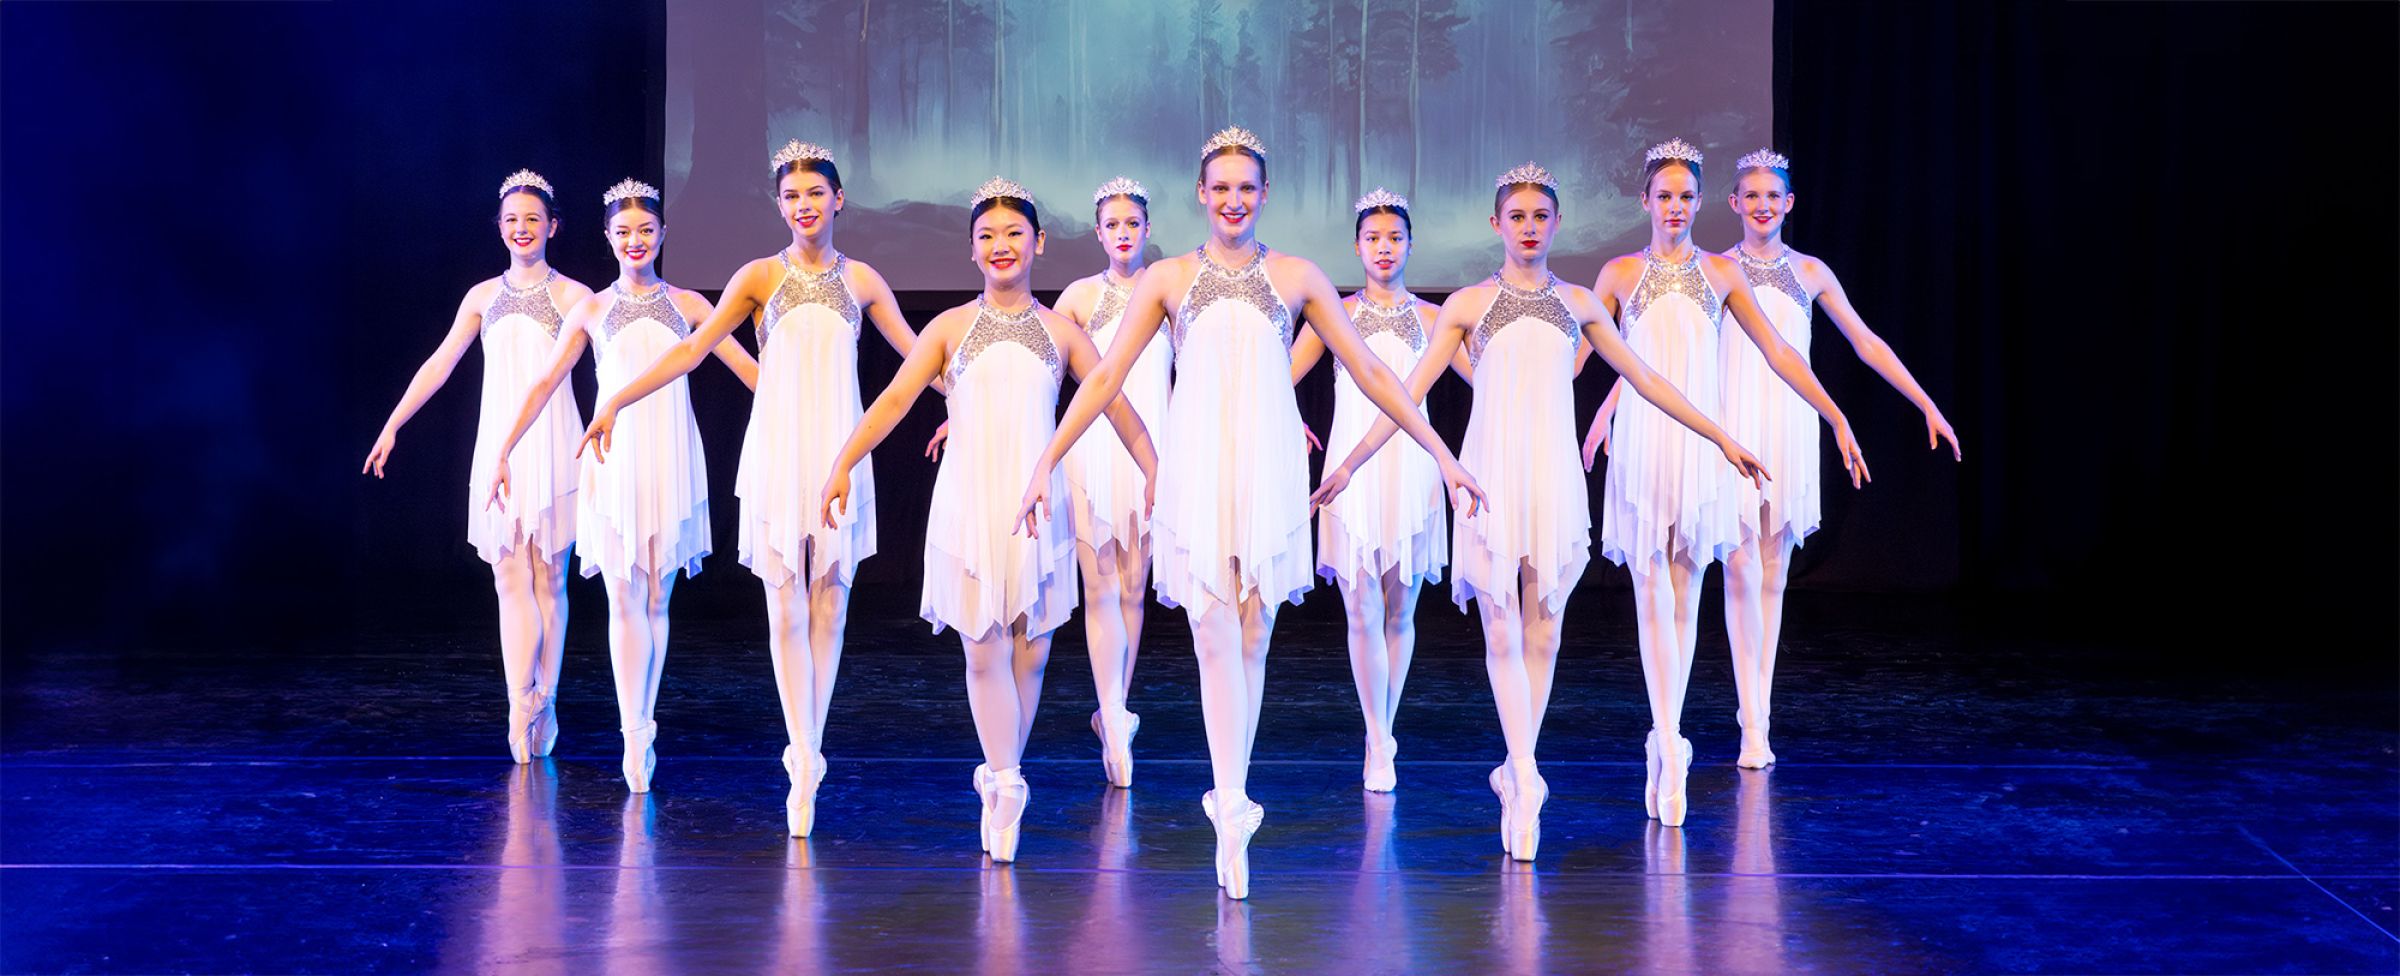 Students en pointe in the ballet production, Trilogy